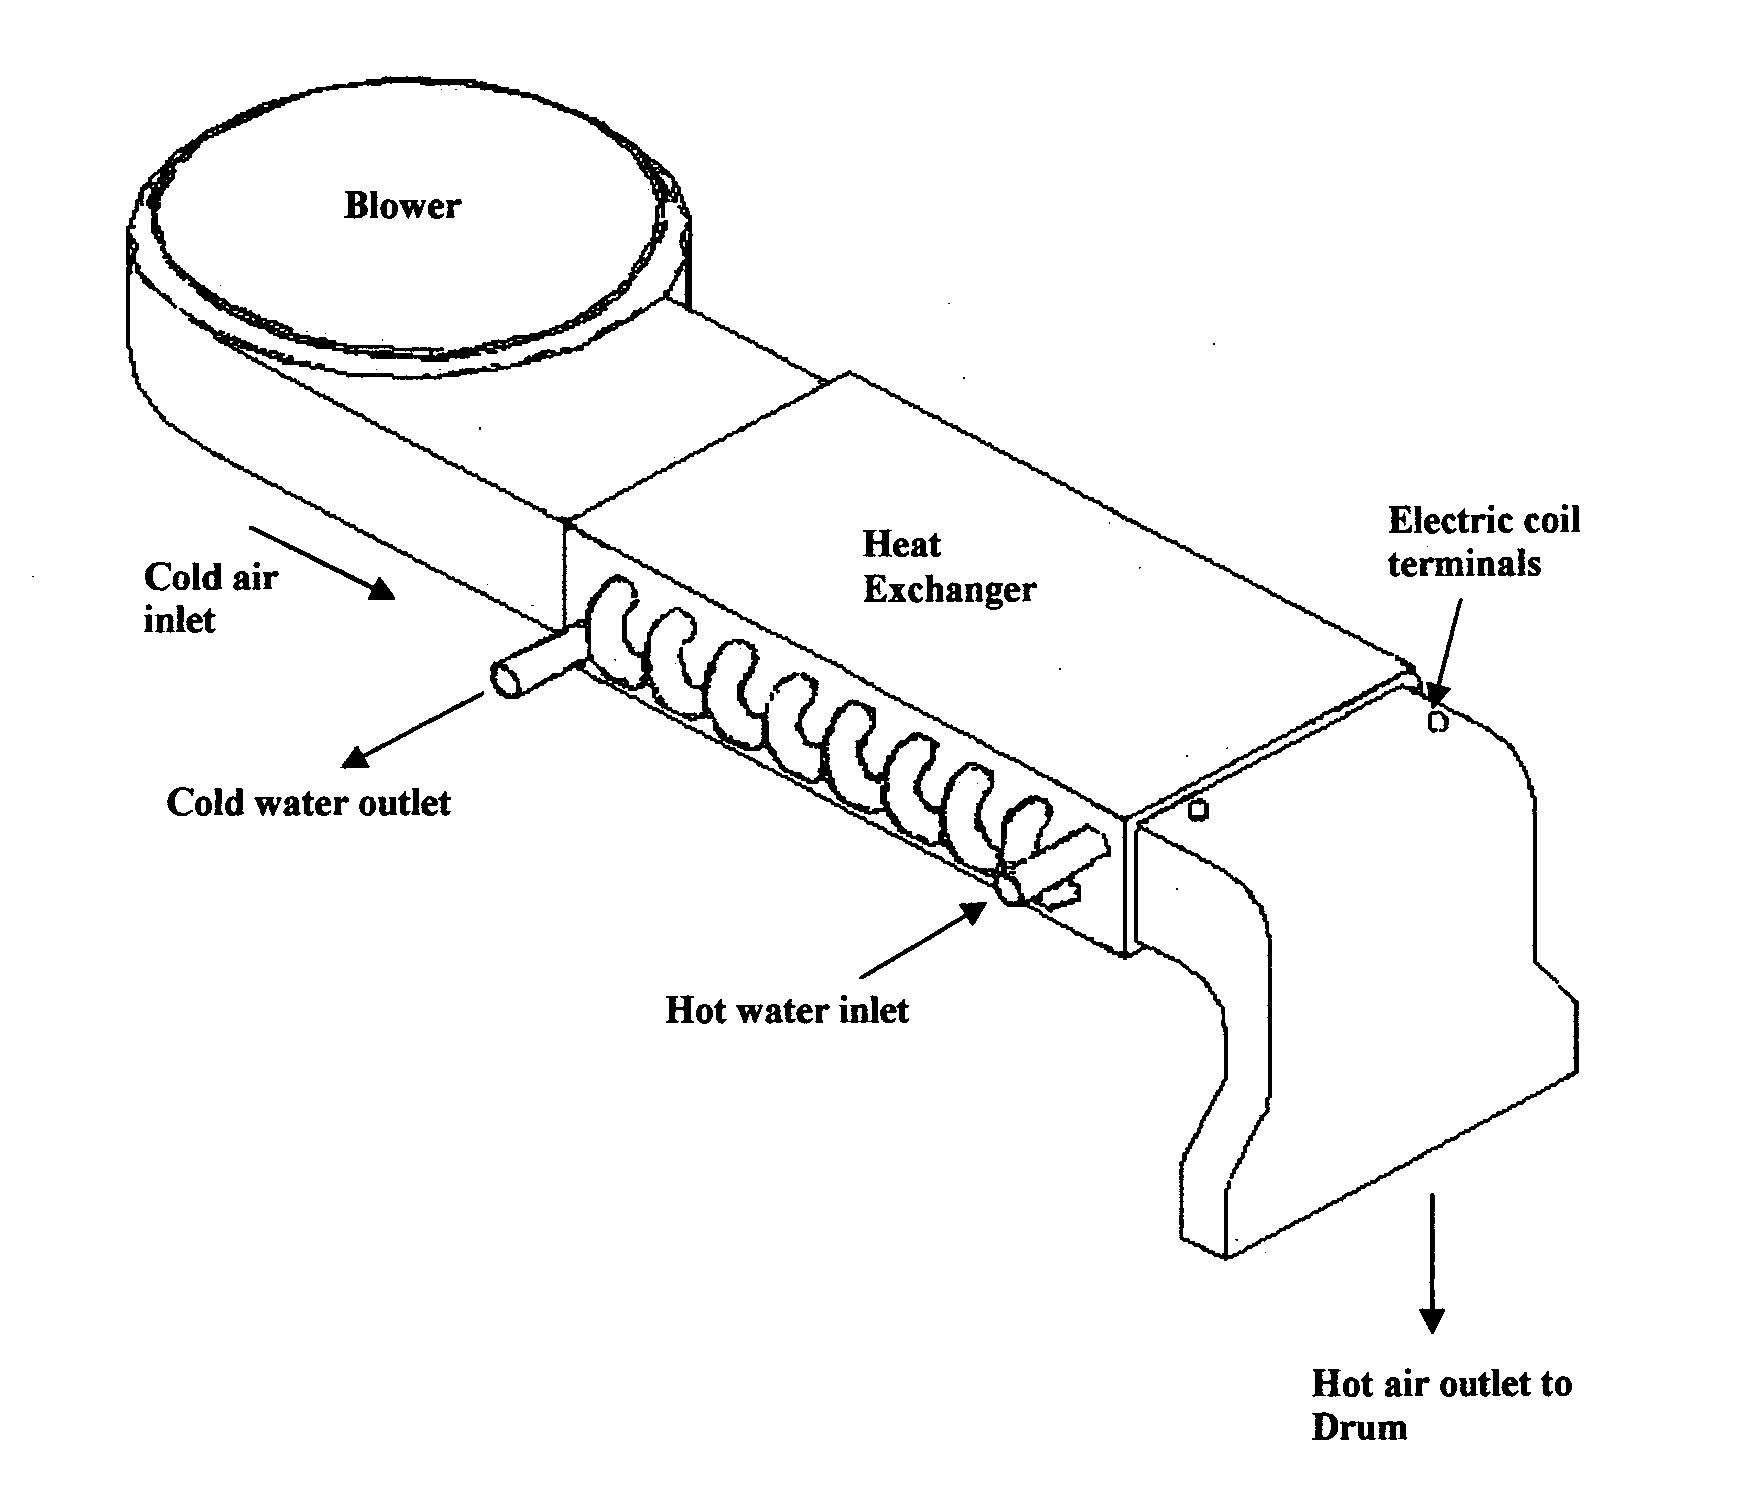 Water-based heater for an electric clothes dryer